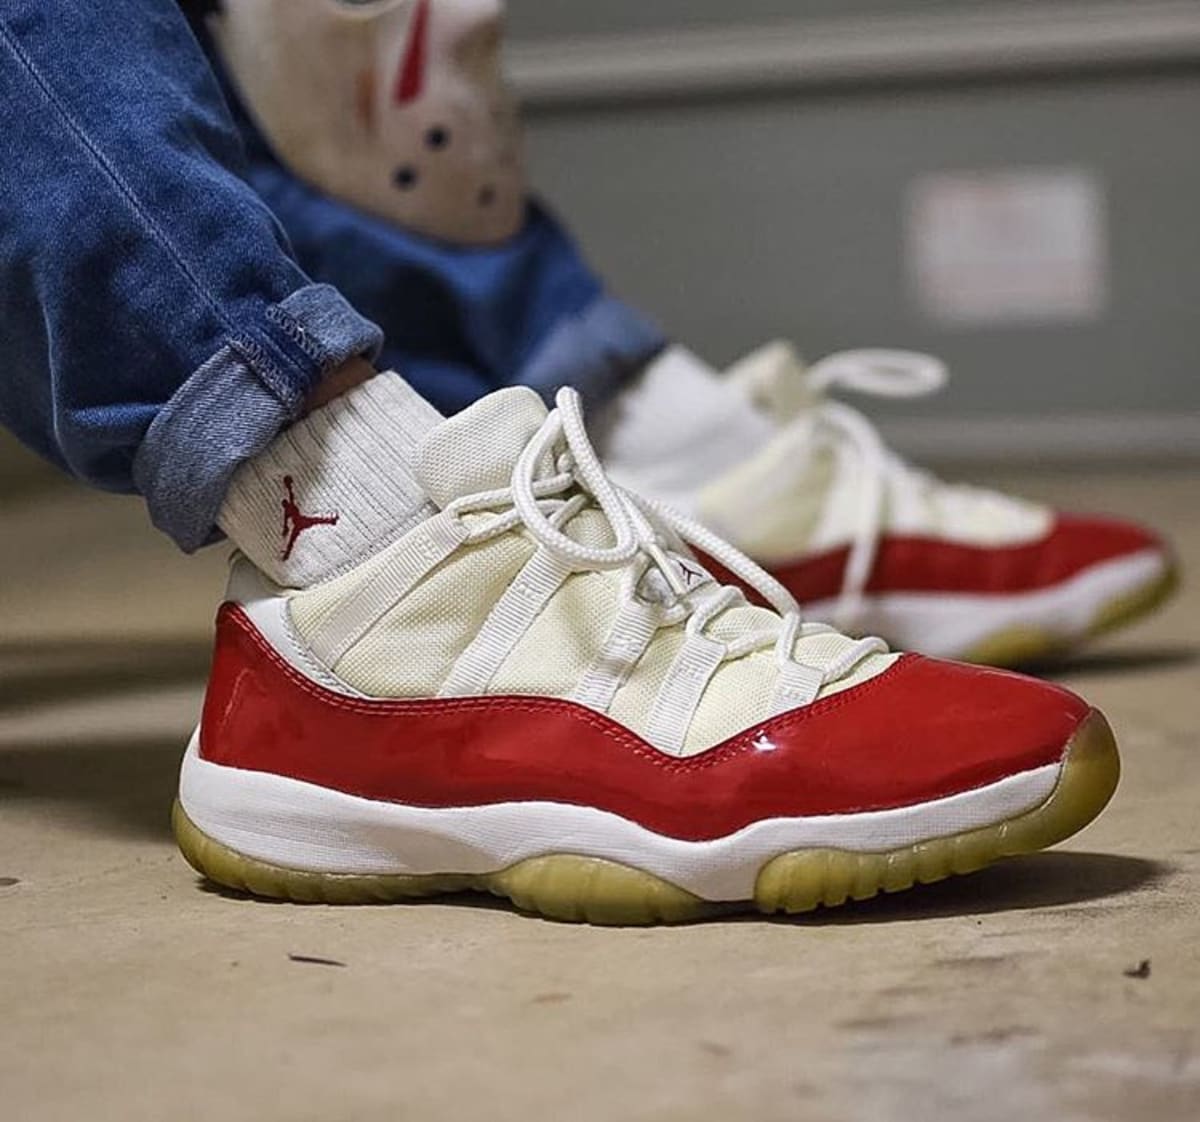 Air Jordan 11 Retro Low "Cherry" (O.G.) - What You Wore: The Best #